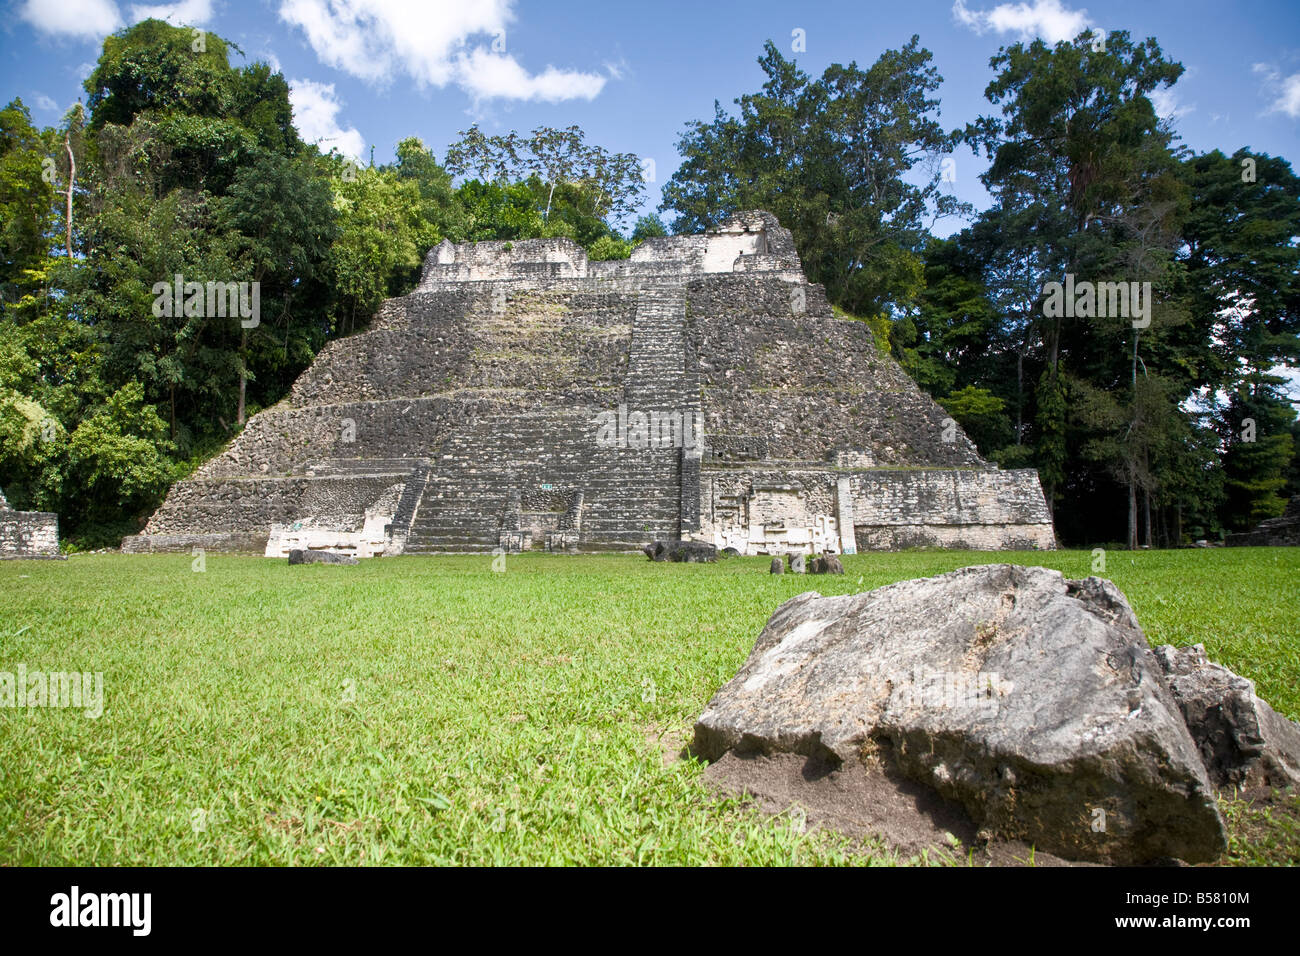 Plaza A Temple, Mayan ruins, Caracol, Belize, Central America Stock Photo